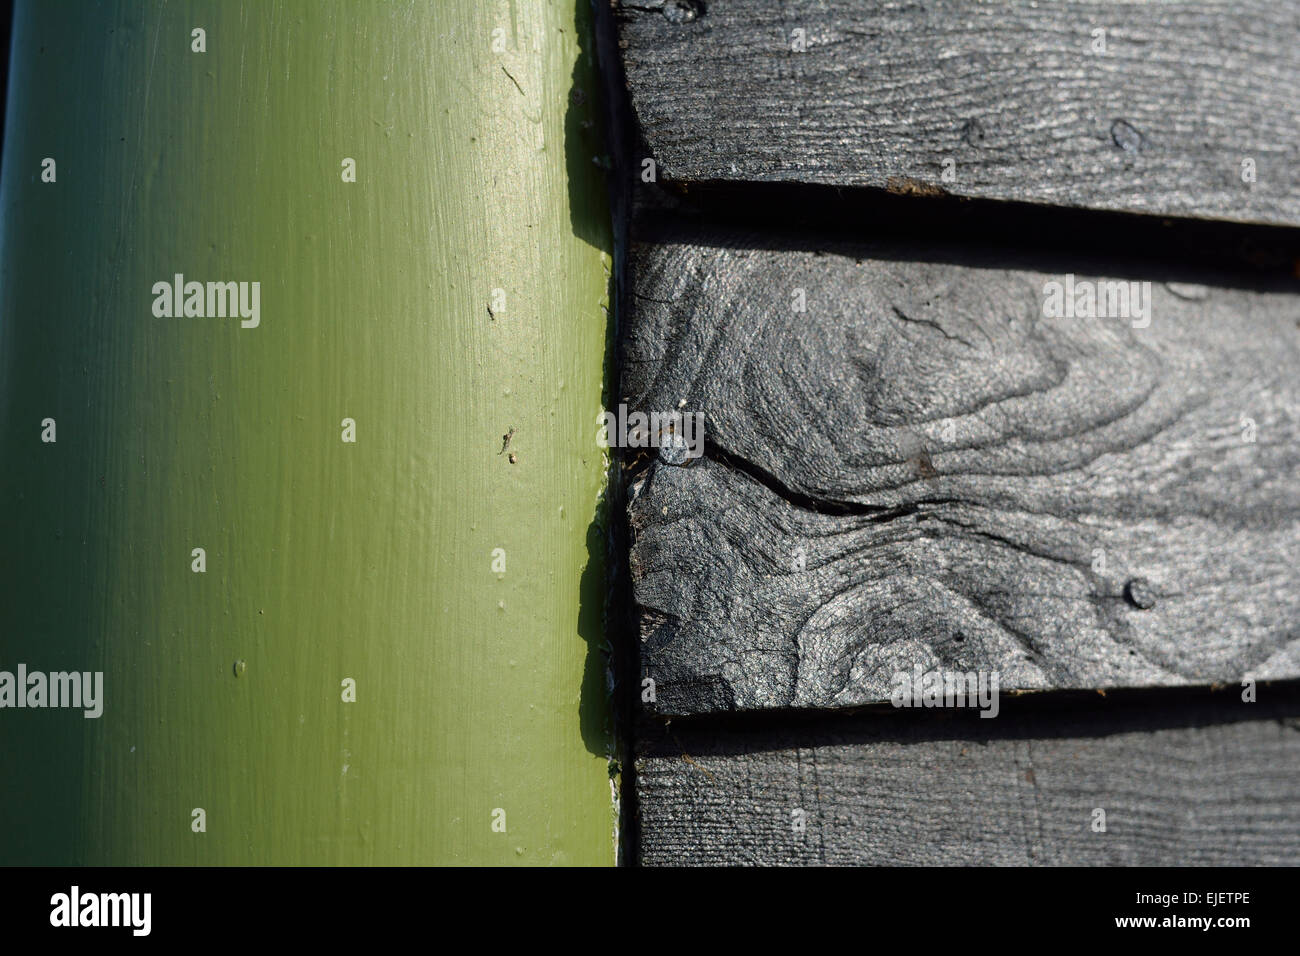 Abstract green pillar & black wooden planks of Bowling Pavilion in Wardown Park, Luton Stock Photo